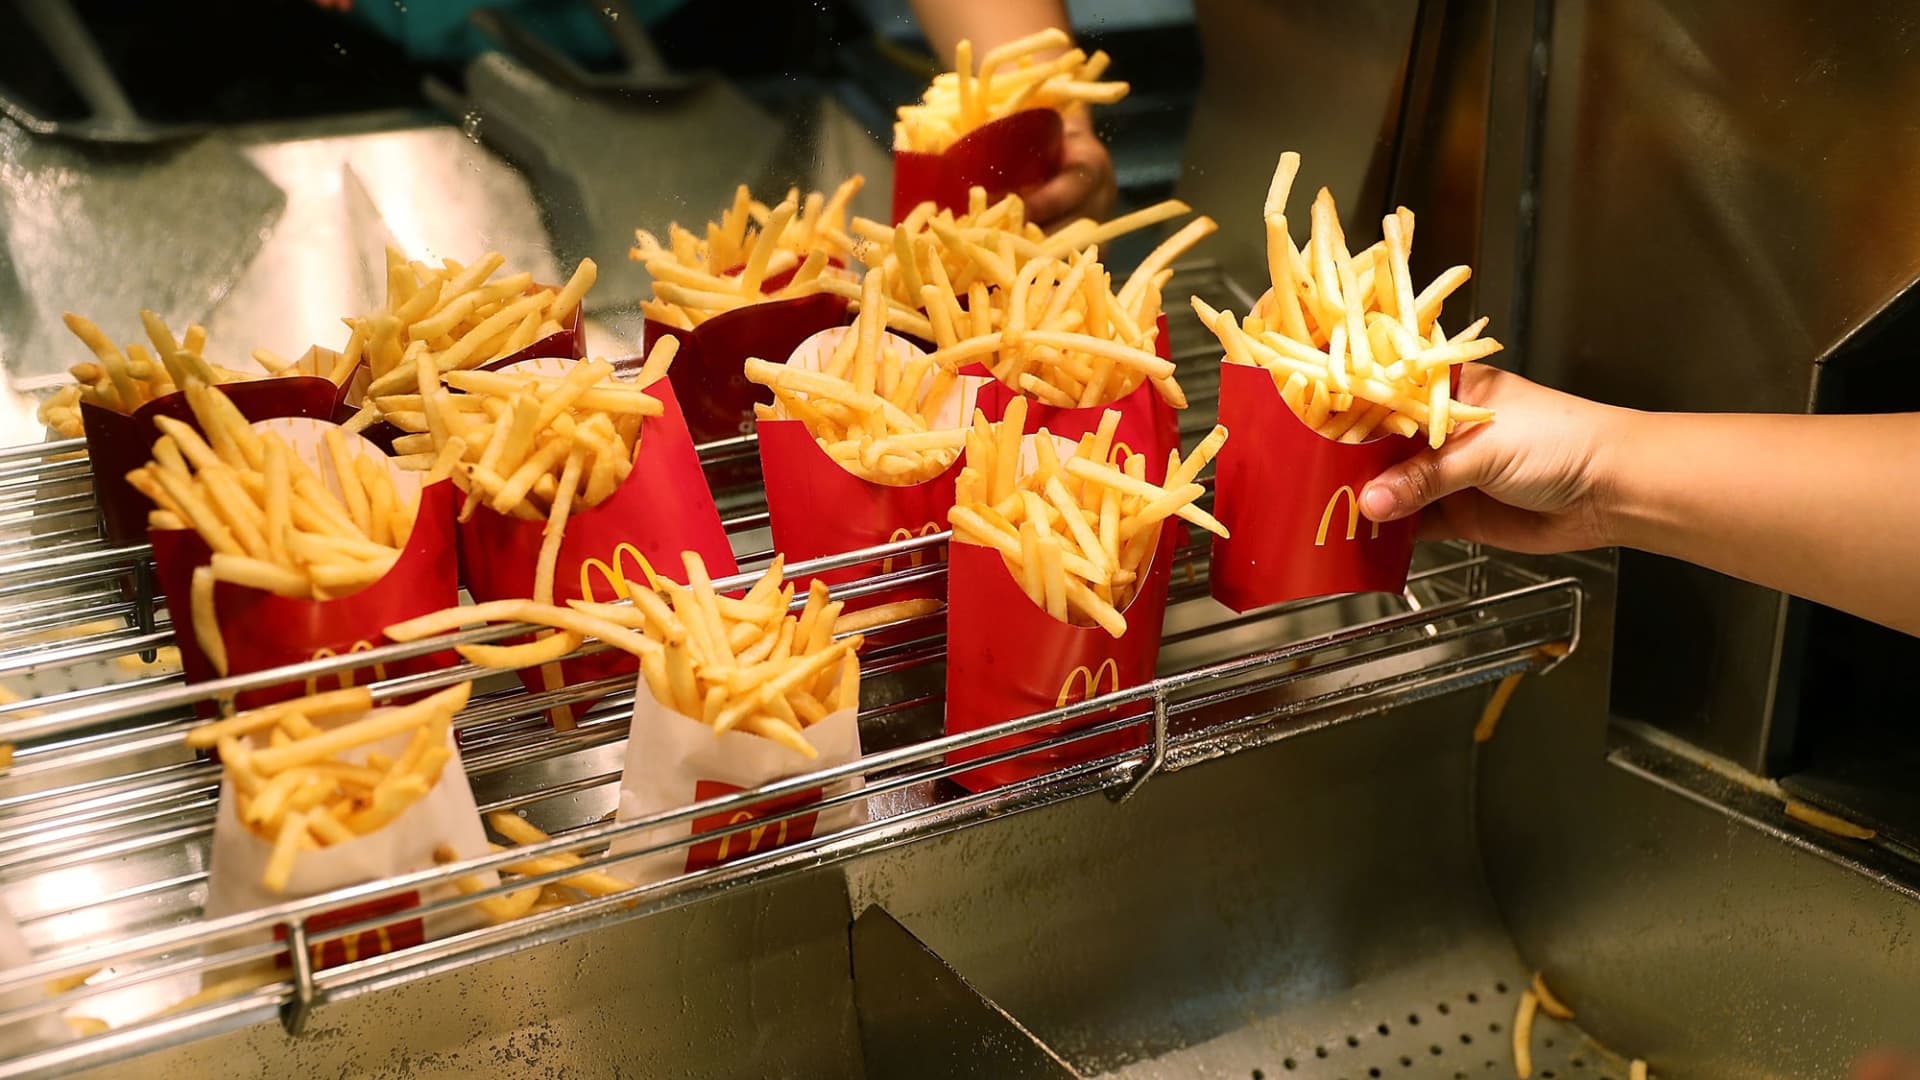 Demand for french fries reflects resilient consumer as so-called fry attachment rate holds steady [Video]